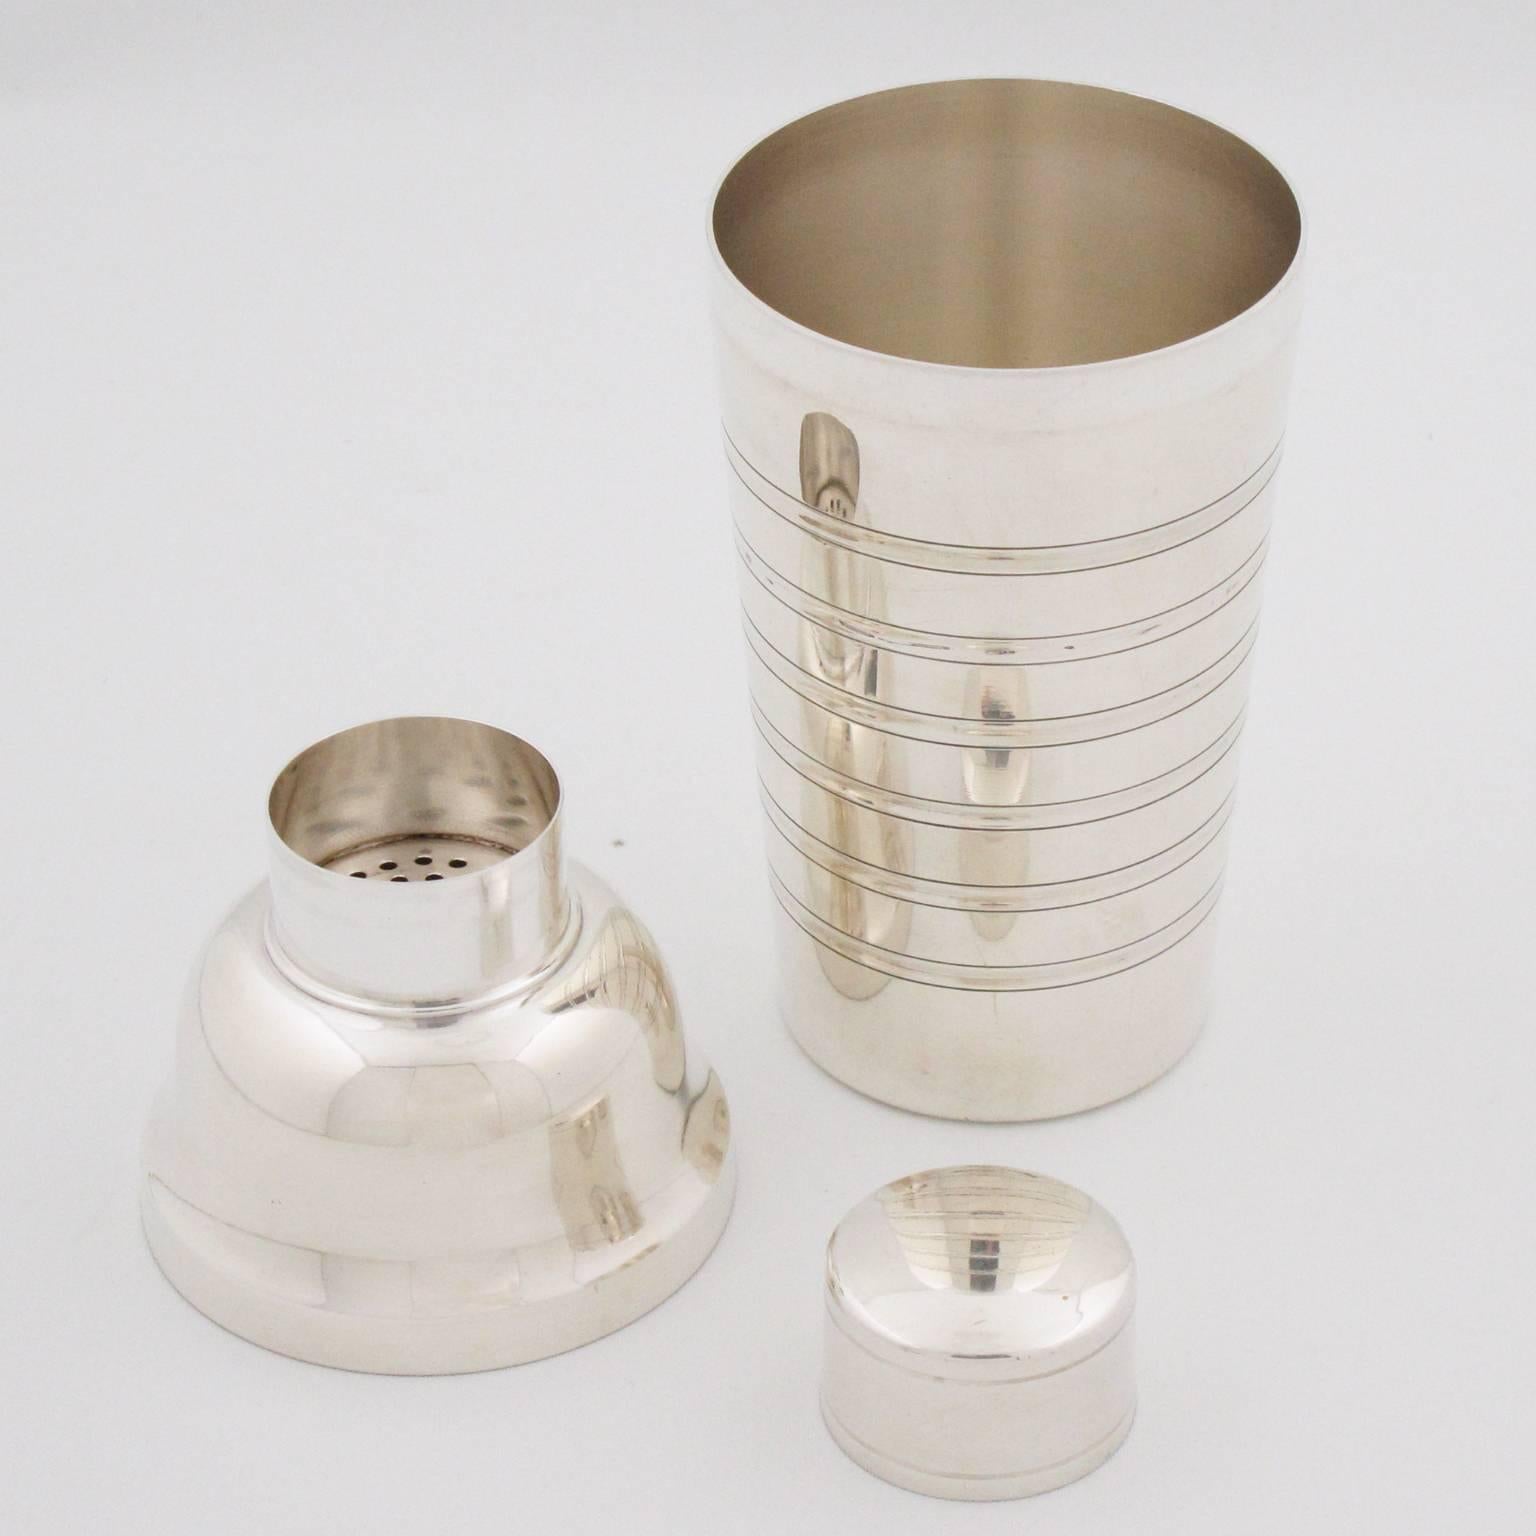 Elegant French Art Deco silver plate cylindrical cocktail or Martini shaker by silversmith Argit, Paris. Three sectioned designed cocktail shaker with removable cap and strainer. Lovely Art Deco design with six decorative bands of engraving. Marked